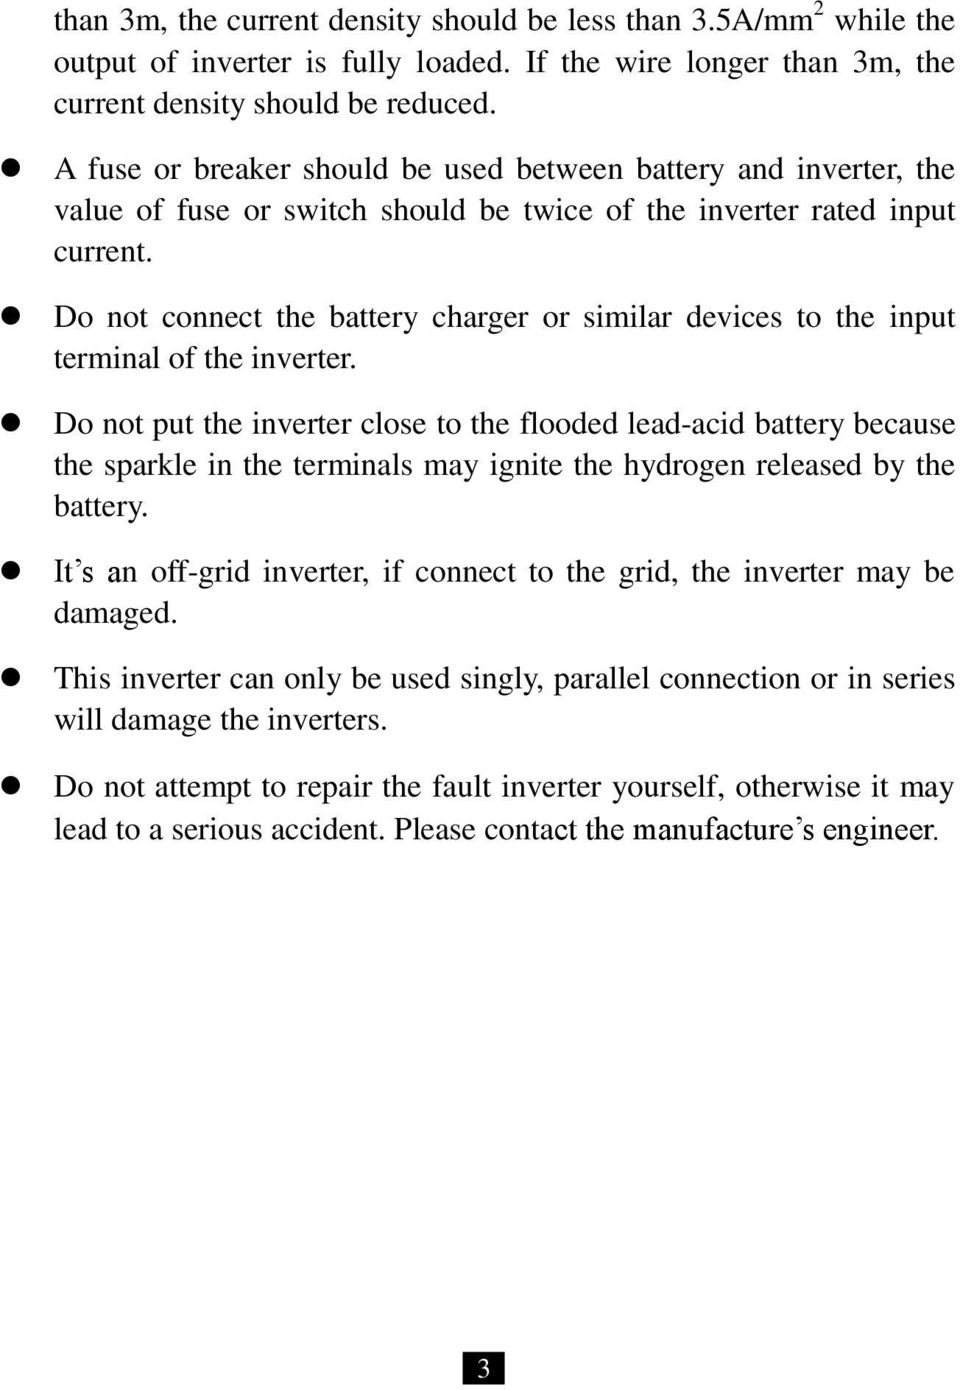 Do not connect the battery charger or similar devices to the input terminal of the inverter.